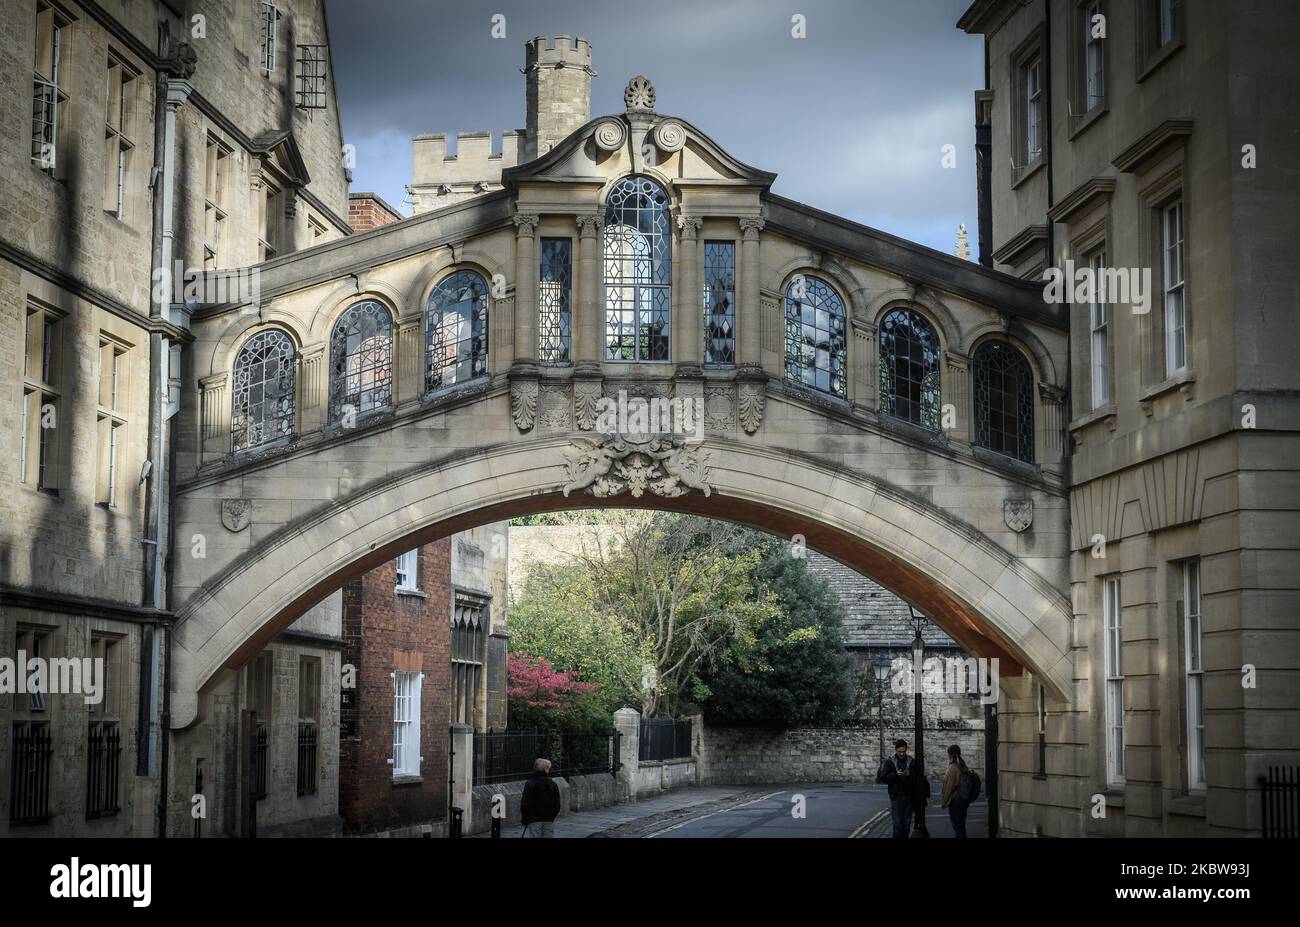 Images of Oxford, Oxfordshire, England, UK. The Bridge of Sighs. Picture by Paul Heyes, Monday October 10, 2022. Stock Photo